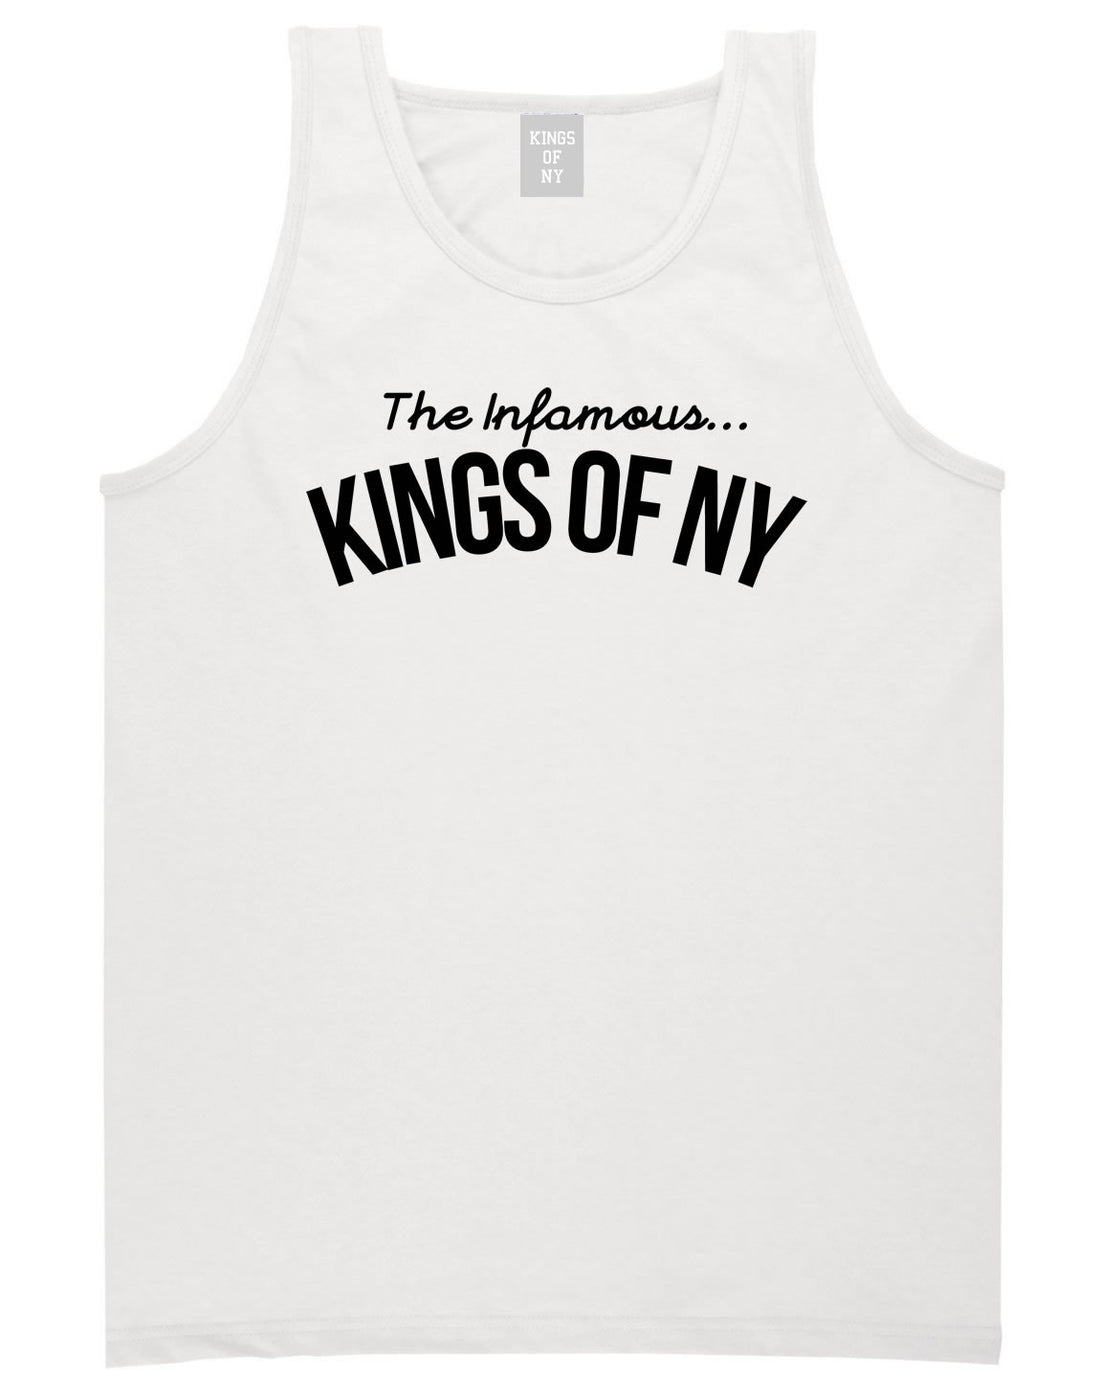 The Infamous Kings Of NY Tank Top in White By Kings Of NY